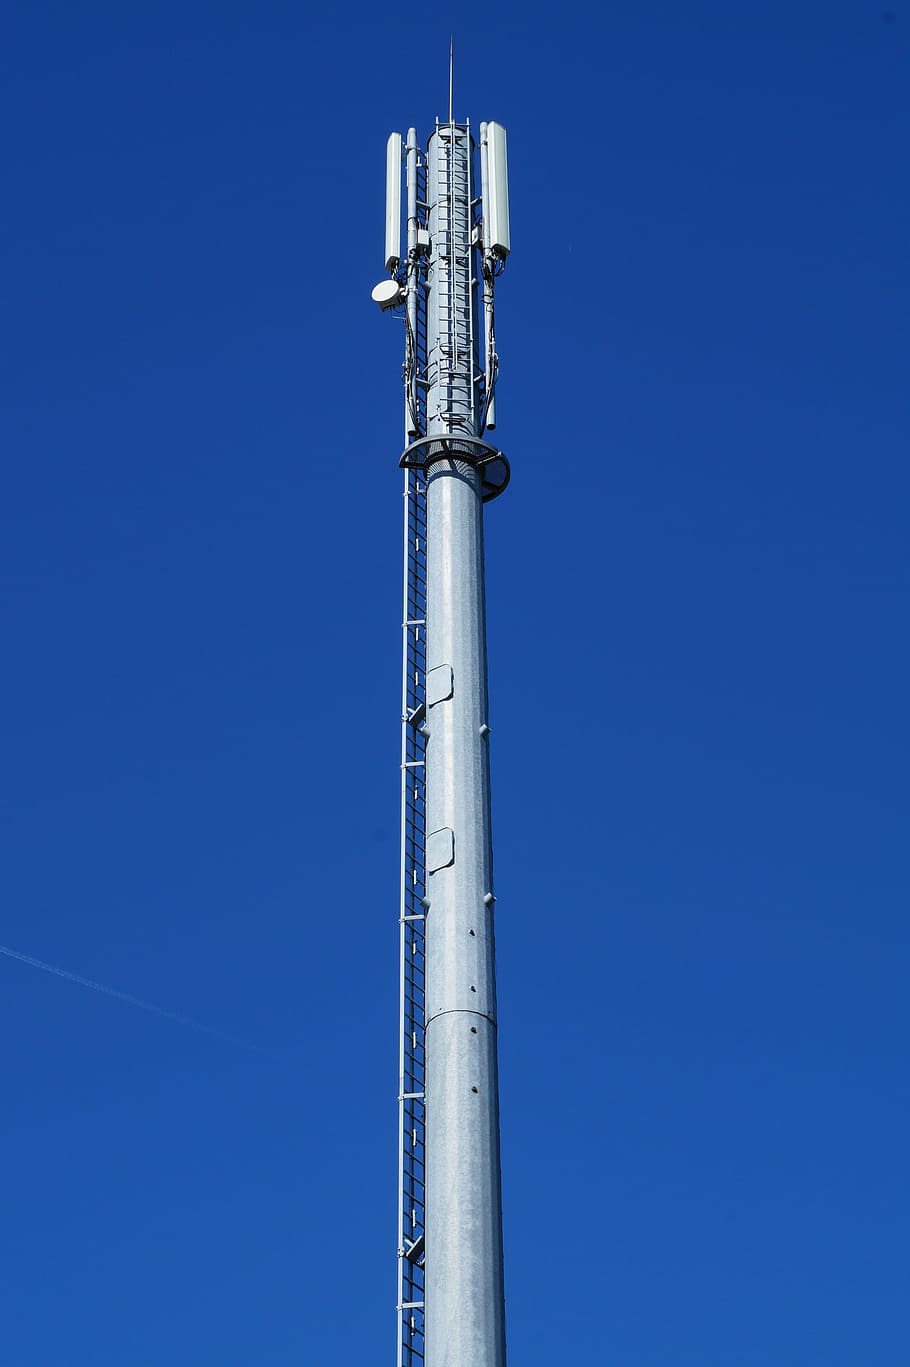 antenna, mast, tower, communication, cellular, cell phone, mobile, network, telephone, blue